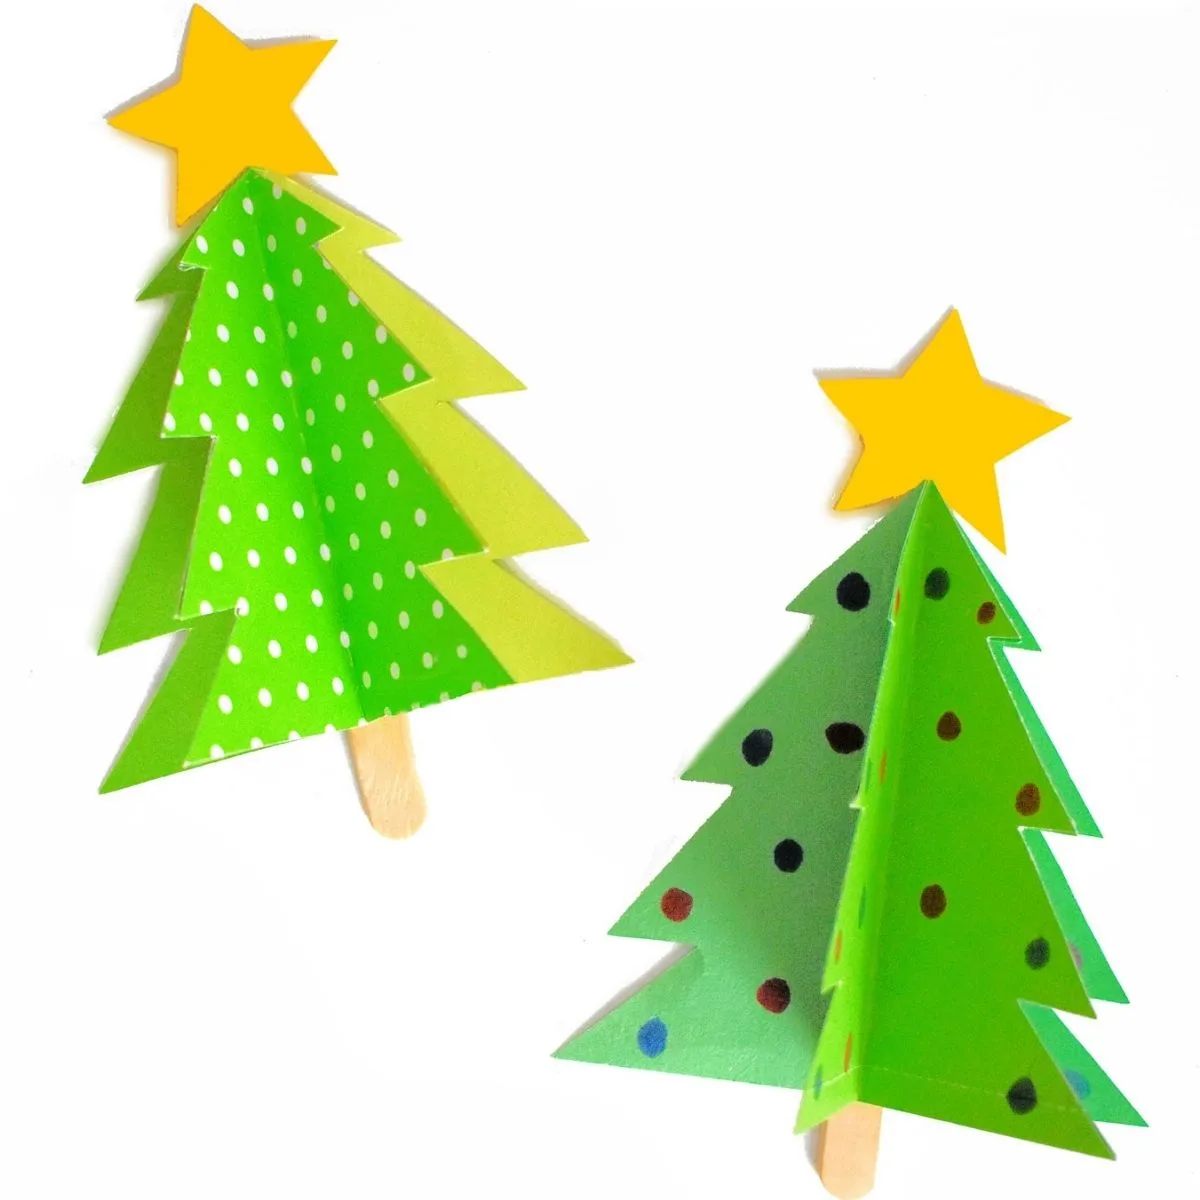 2 christmas tree paper crafts for kids